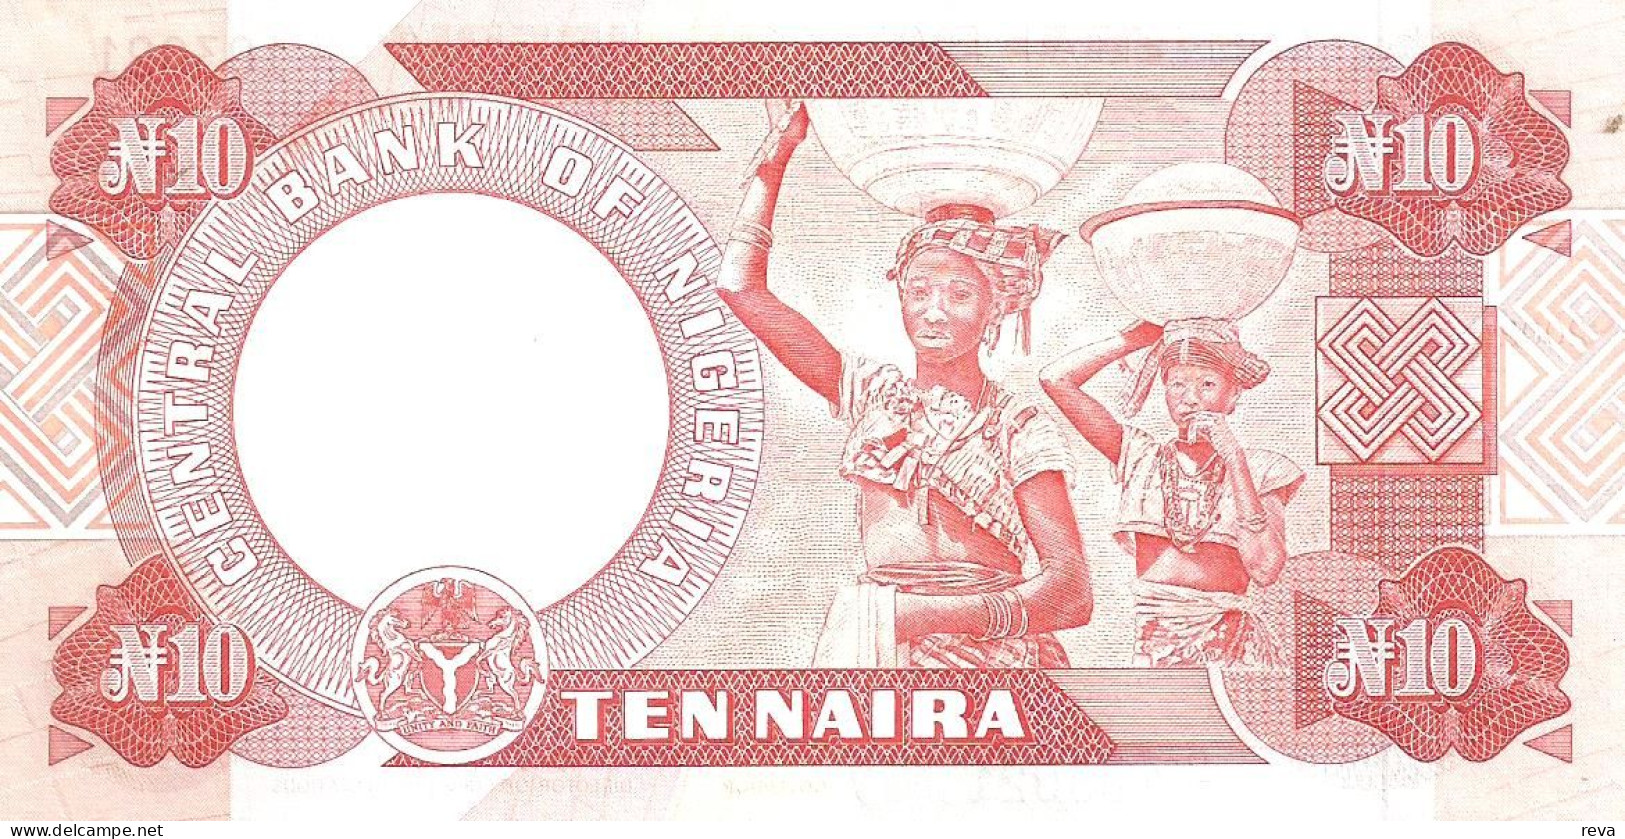 NIGERIA 10 NAIRA RED MAN FRONT AND BACK BACK SIG.? DATED 2002 UNC P.25f READ DESCRIPTION !! - Nigeria